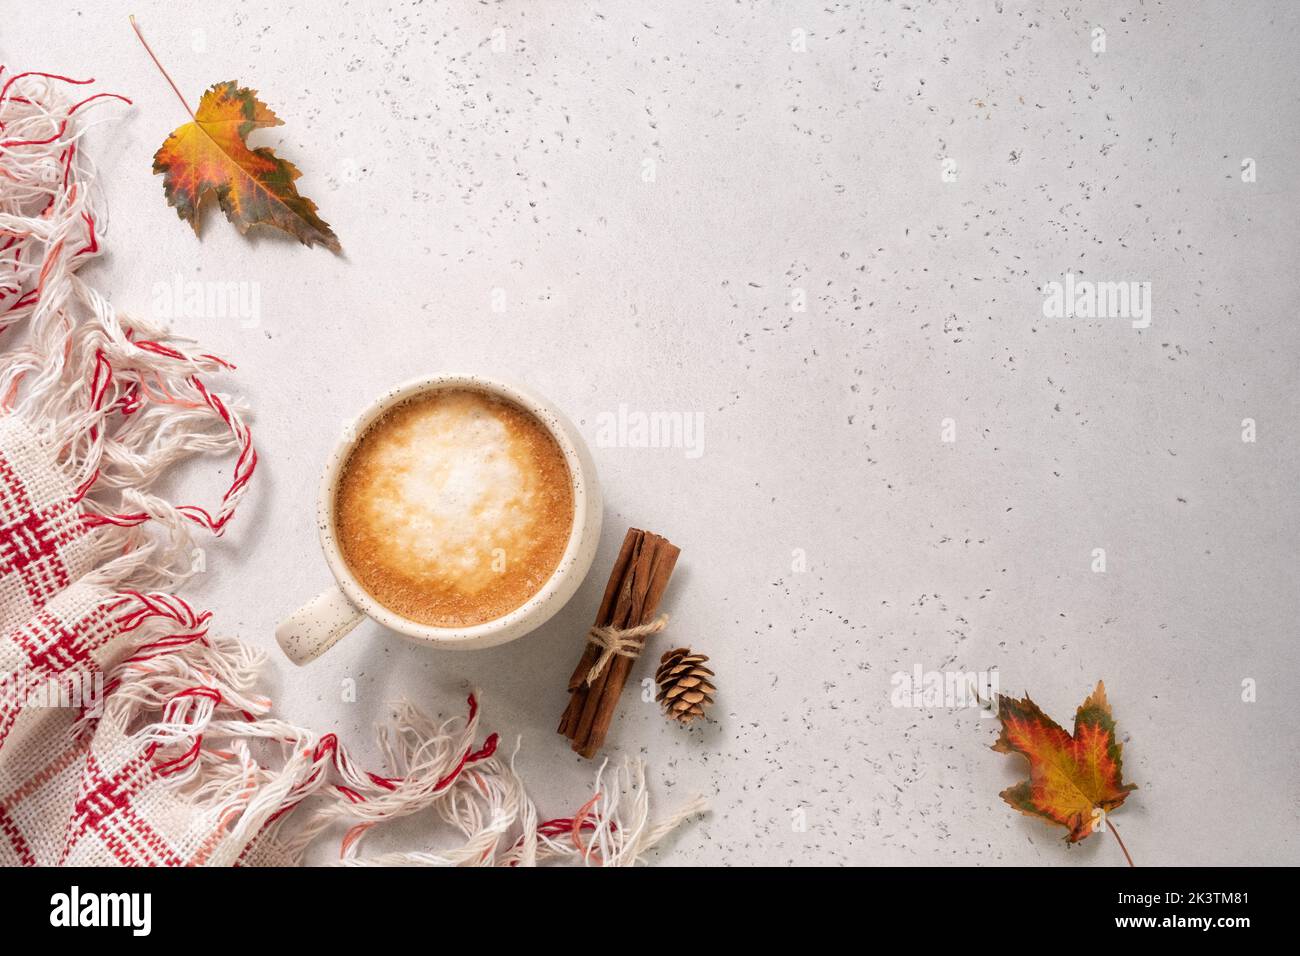 Autumn composition. Cup of coffee, blanket, autumn leaves, cinnamon sticks on white background. Stock Photo